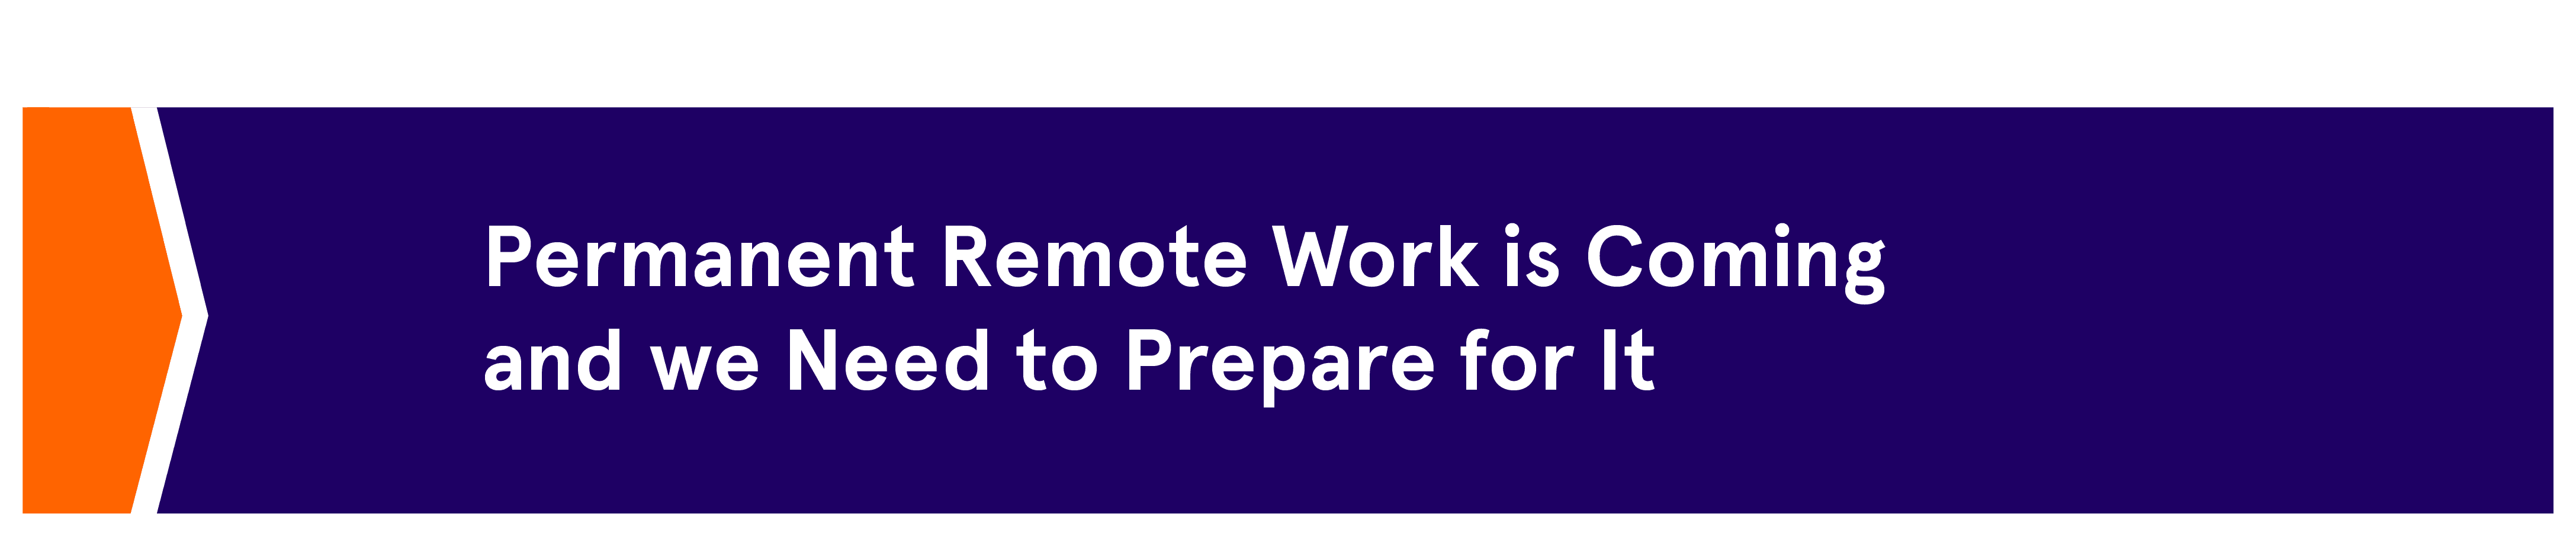 Just Capital Blog Headers__Remote Work is Coming.png